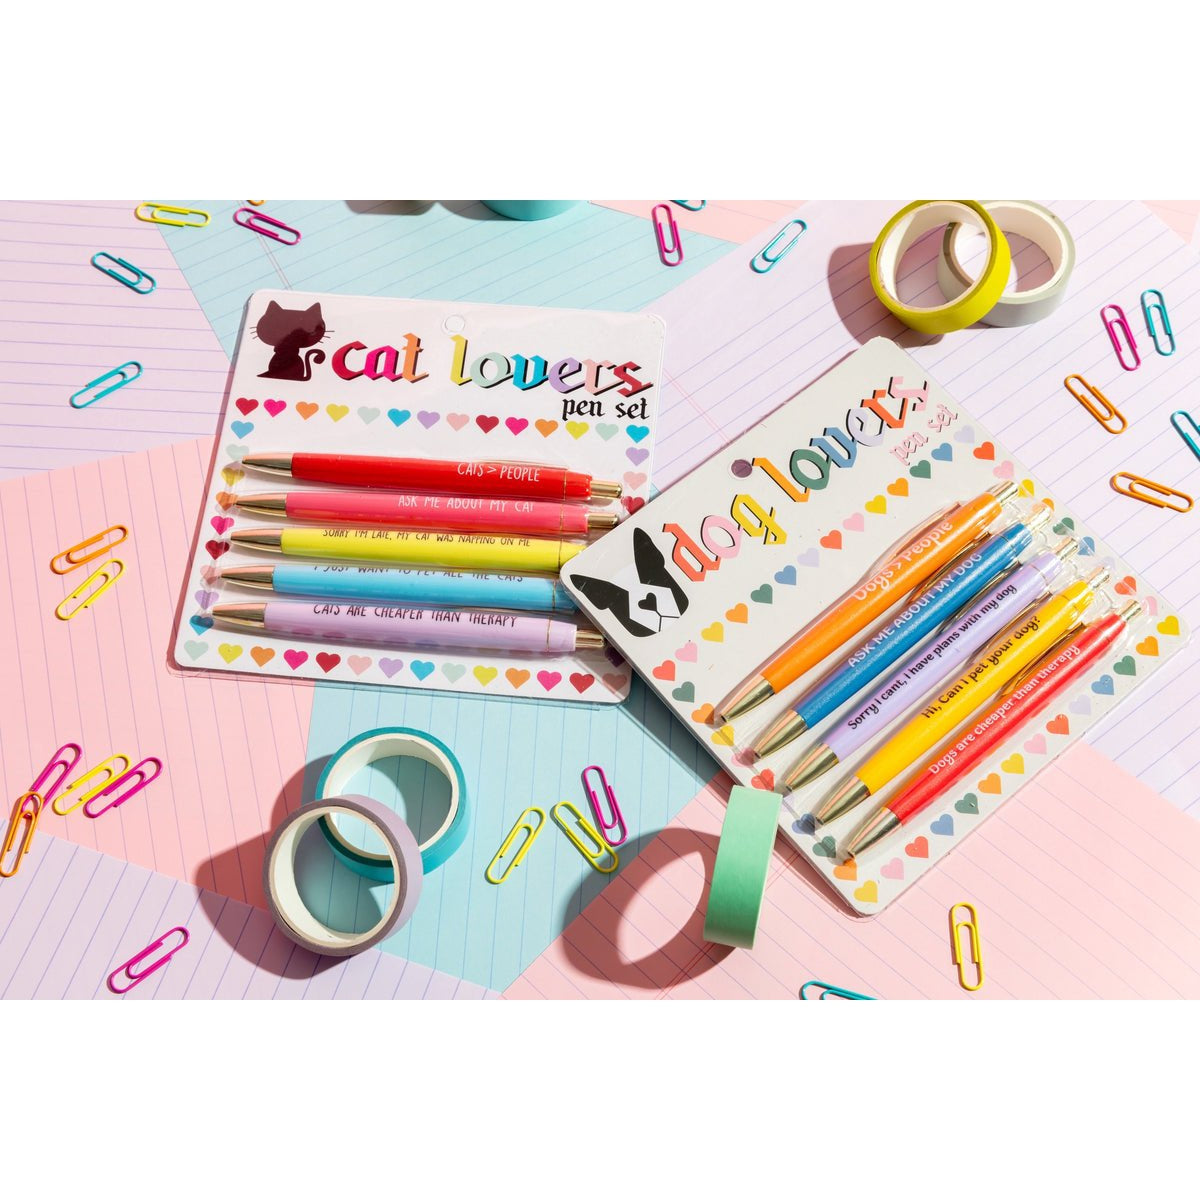 Dog Lovers Multicolor Pen Set | 5 Funny Pens Packaged for Gifting | Dogs > People, Dogs Are Cheaper Than Therapy...